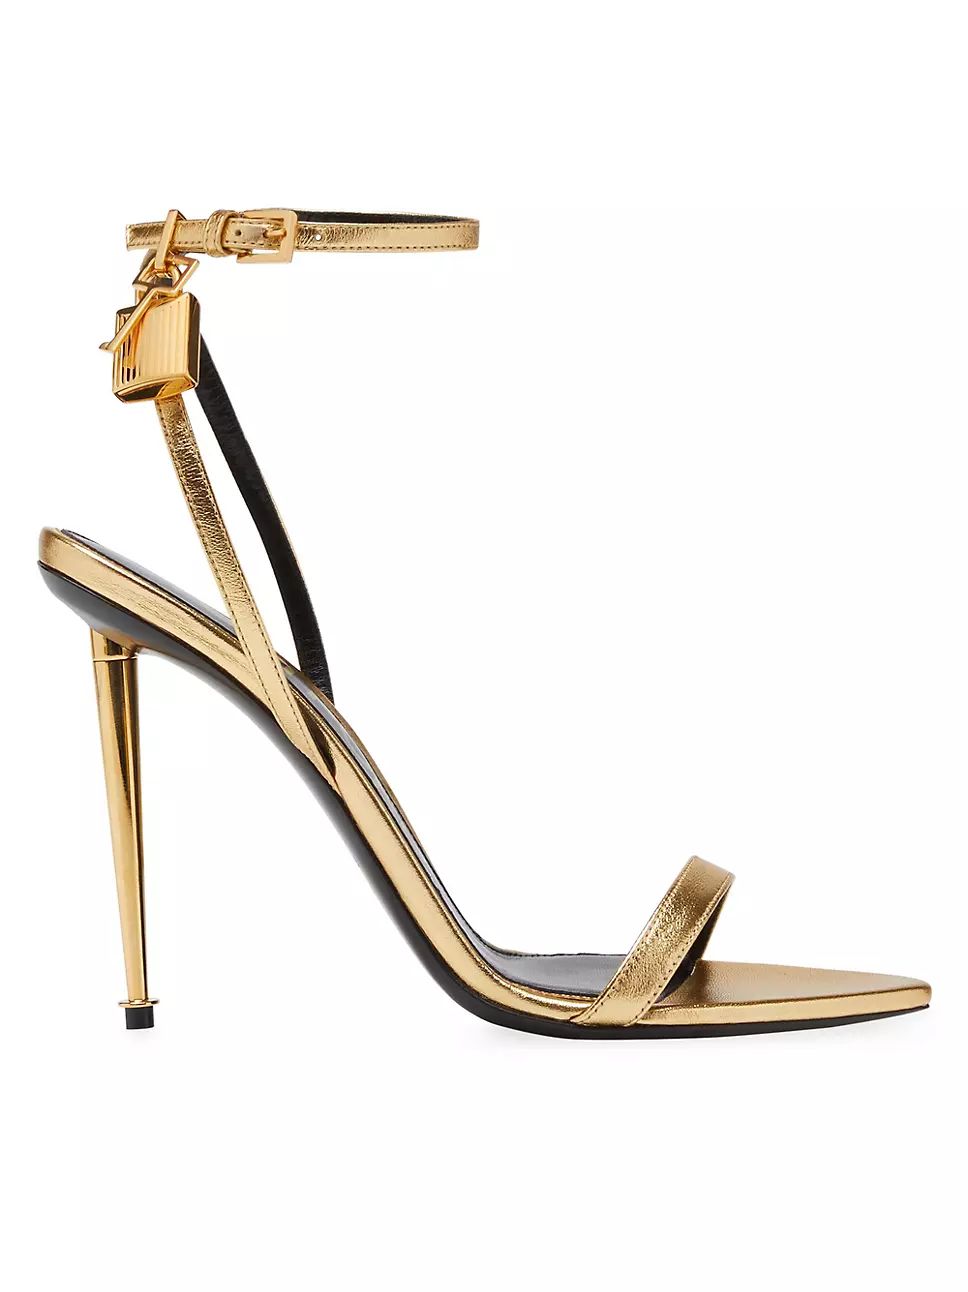 TOM FORD Padlock 105 Metallic Leather Point-Toe Ankle-Strap Sandals | Saks Fifth Avenue